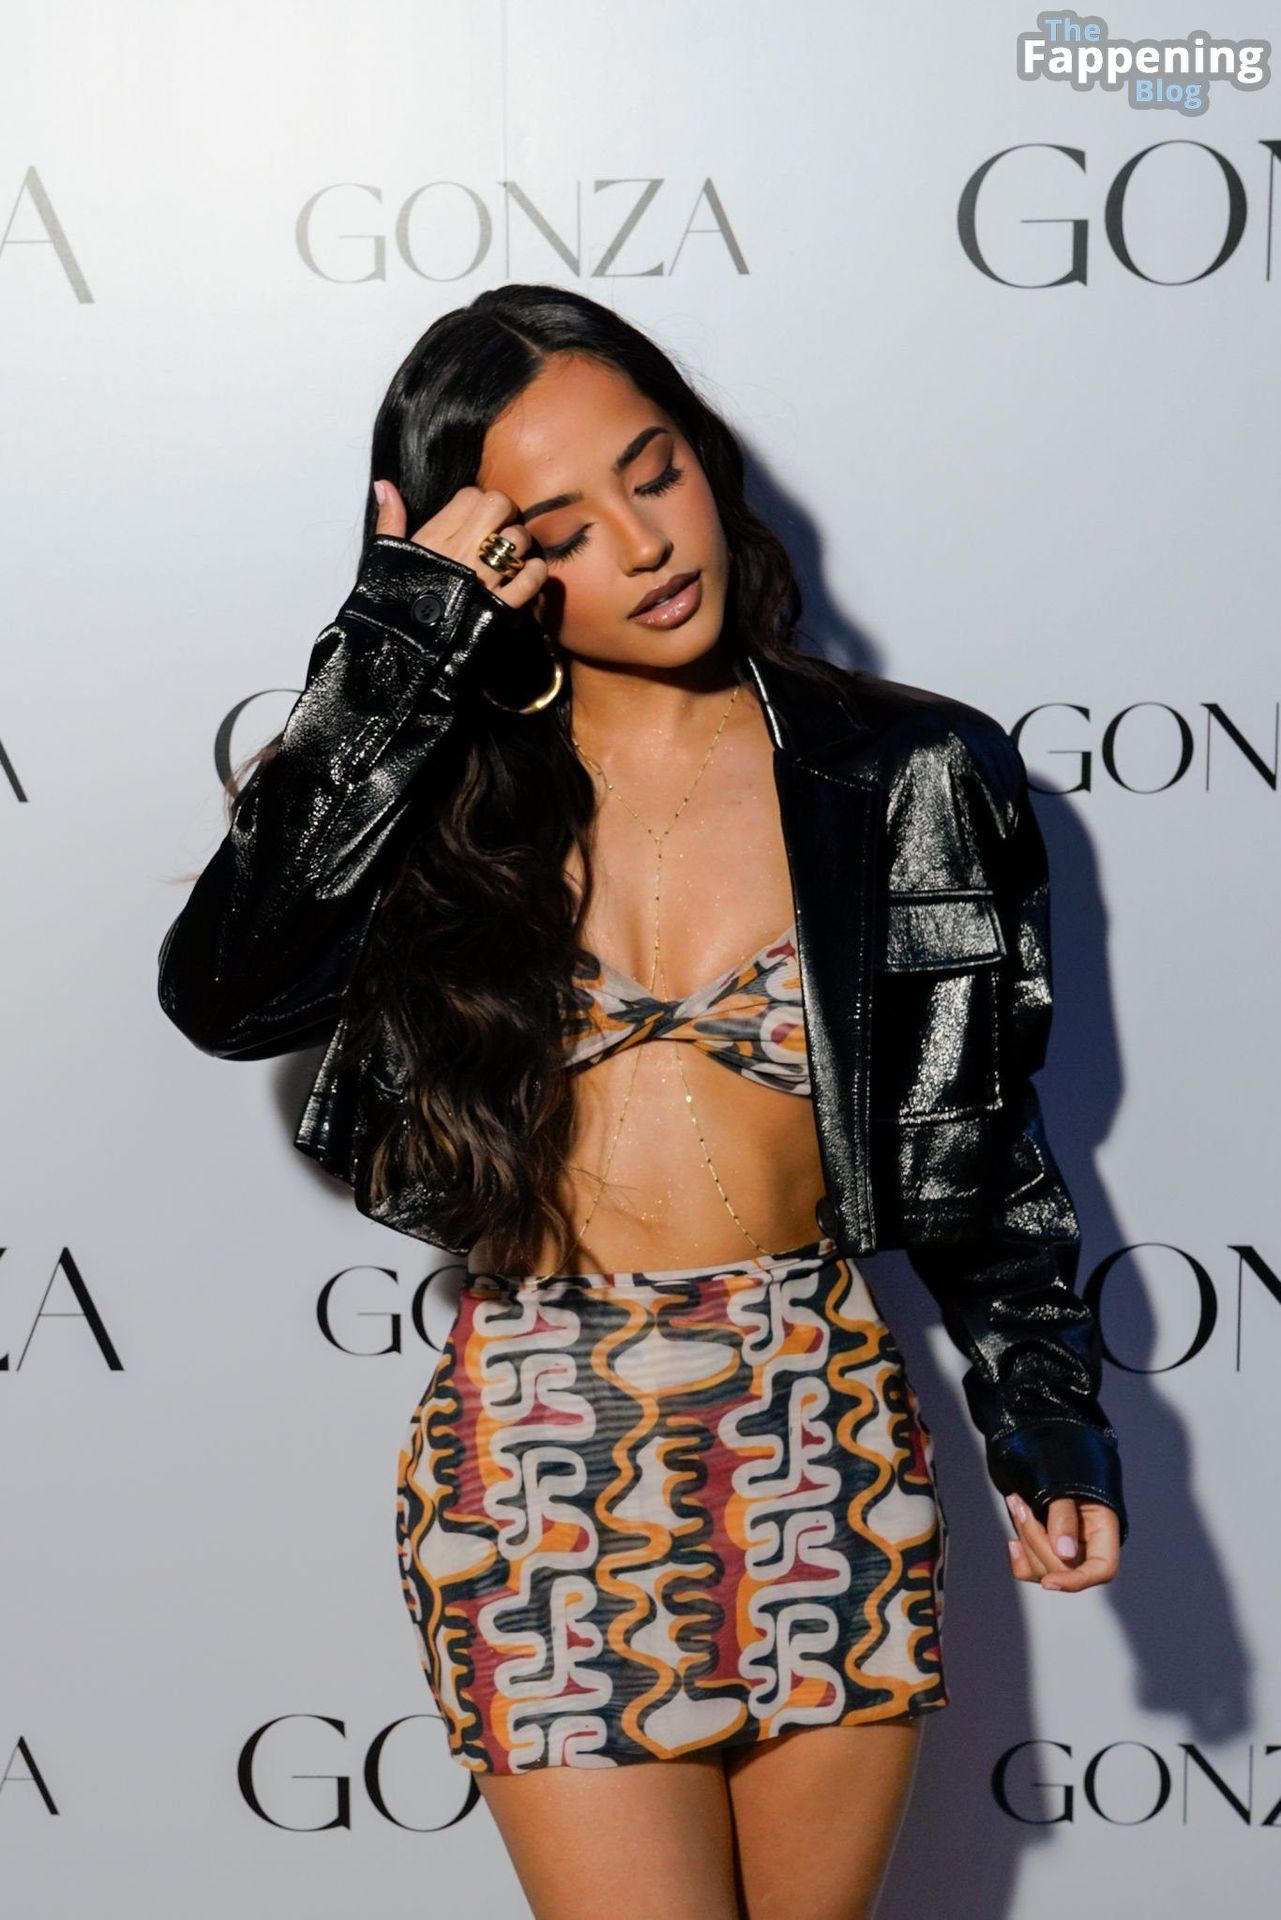 Becky G Flaunts Her Assets at the Gonza Event (20 Photos)